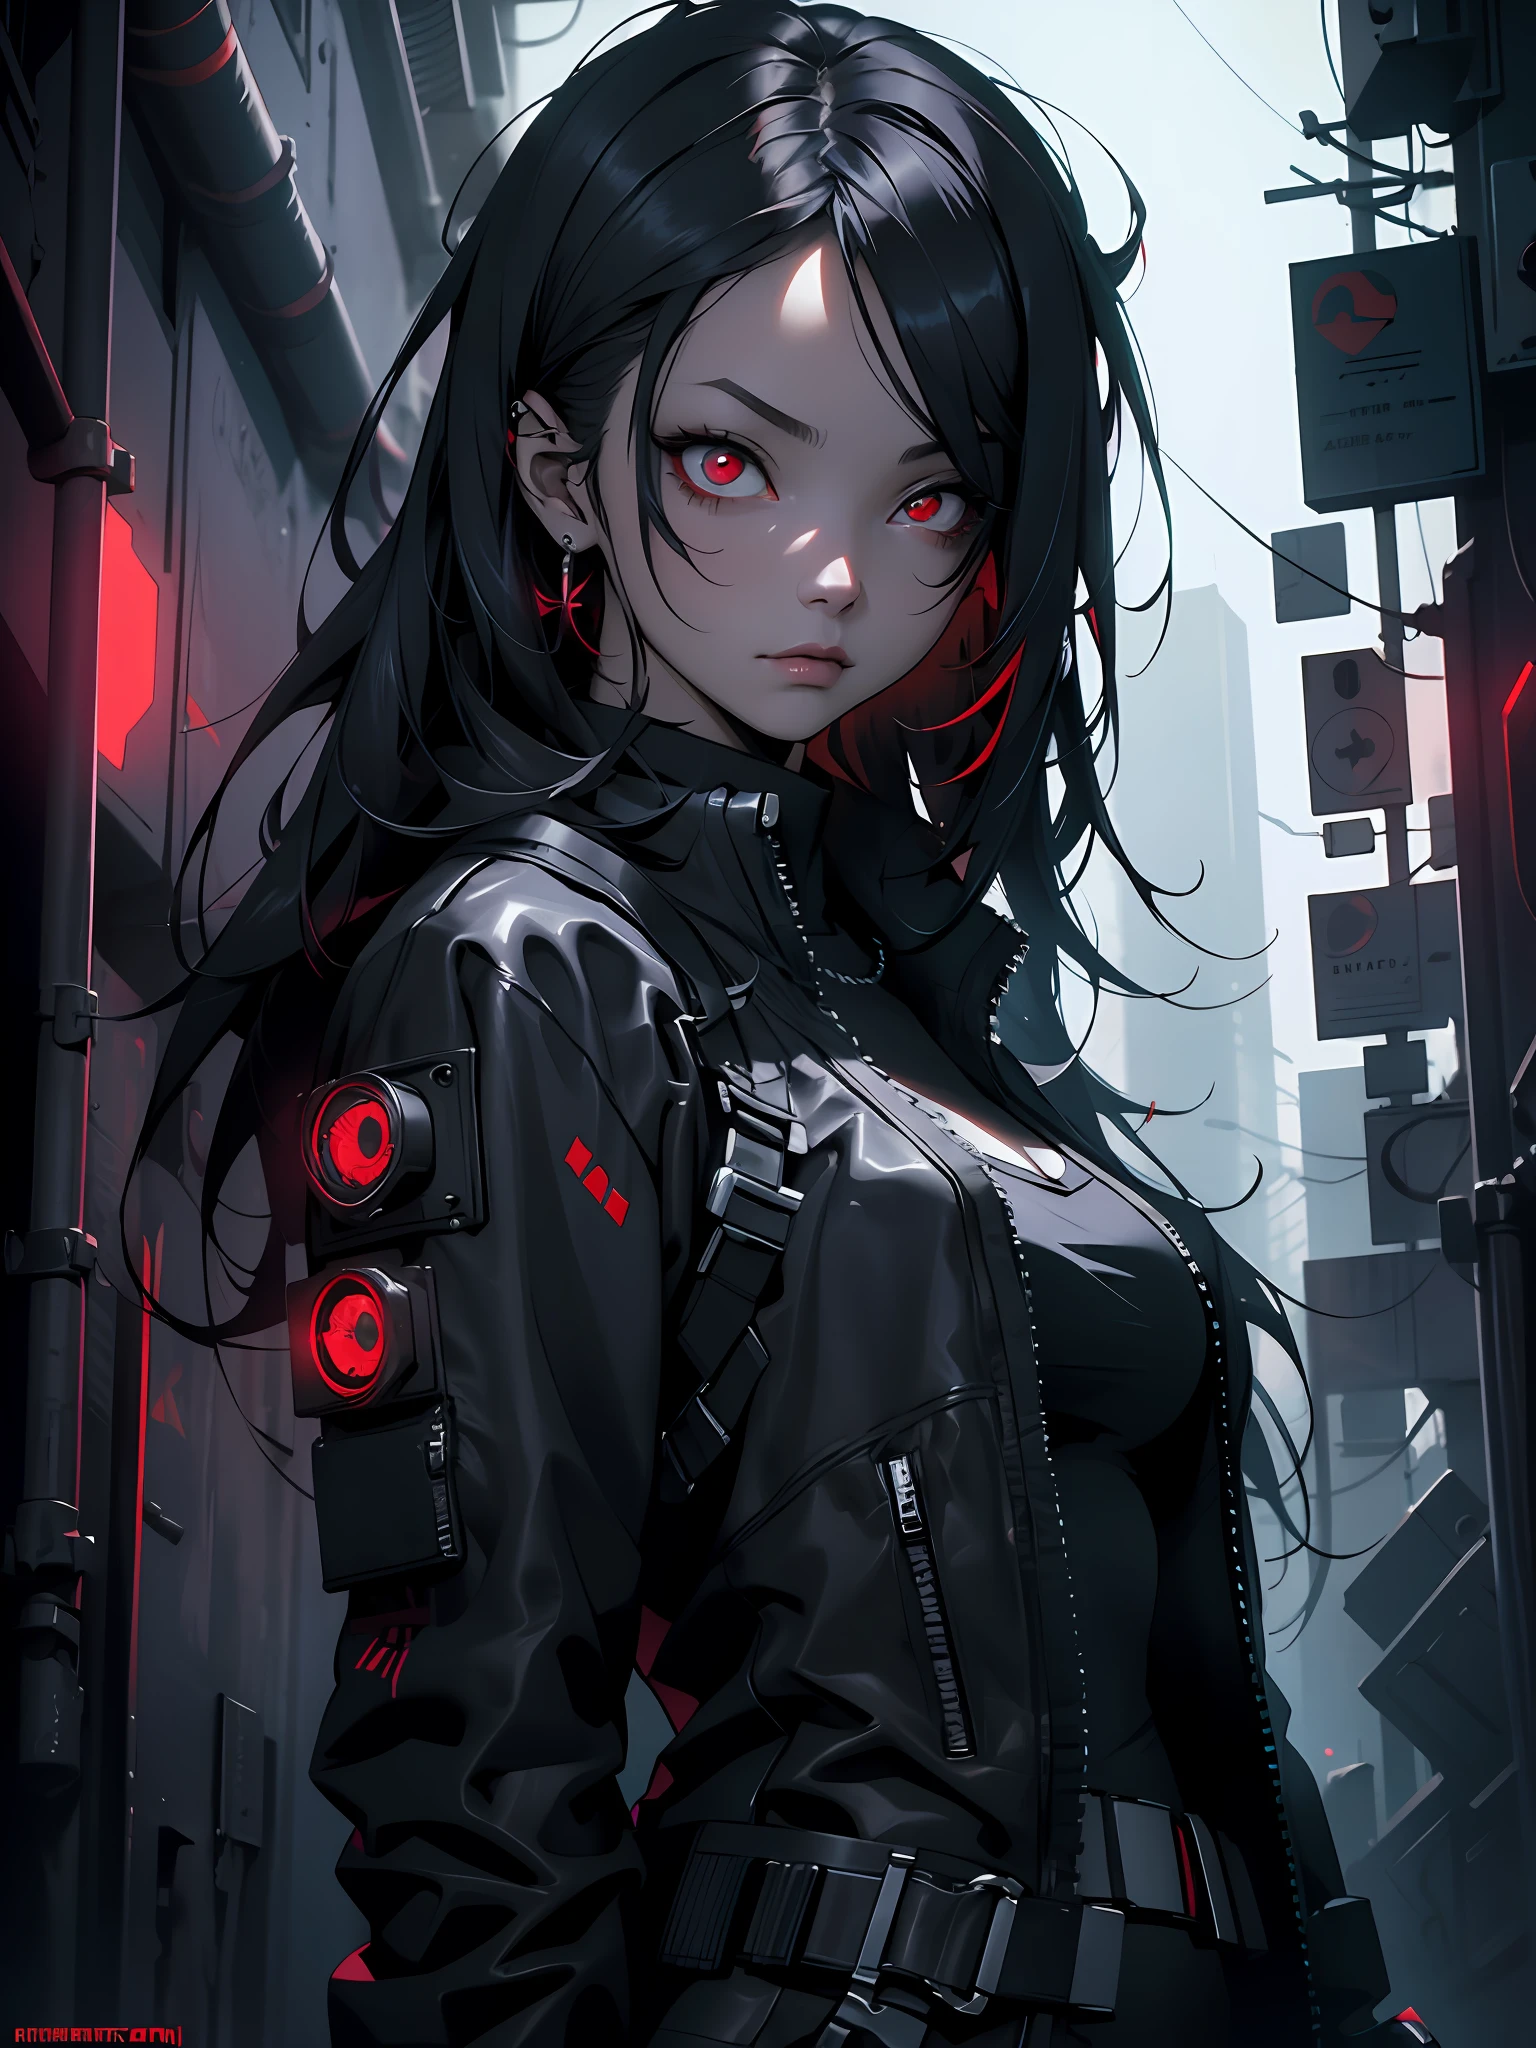 masterpiece, highly detailed, high quality, goth girl, red eyes, cyberpunk, sci-fi, illustration, cinematic lighting,